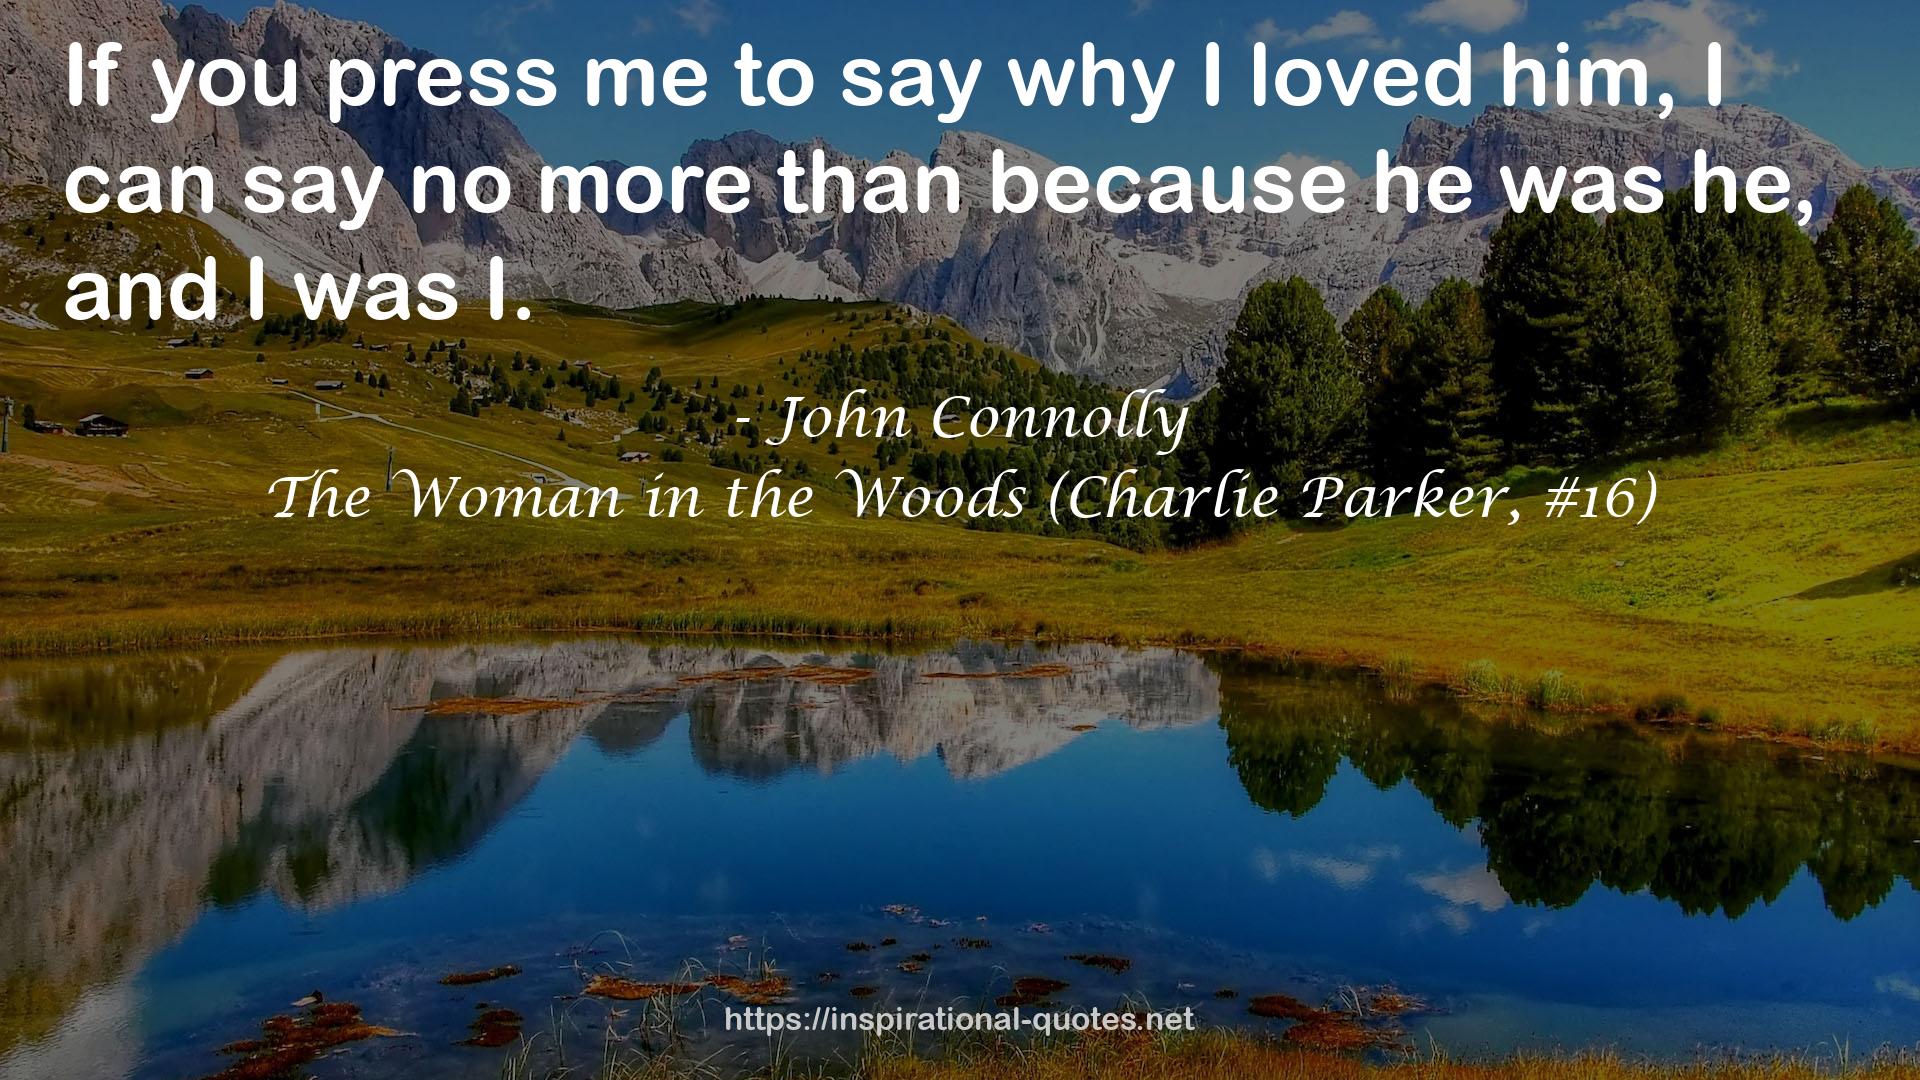 The Woman in the Woods (Charlie Parker, #16) QUOTES